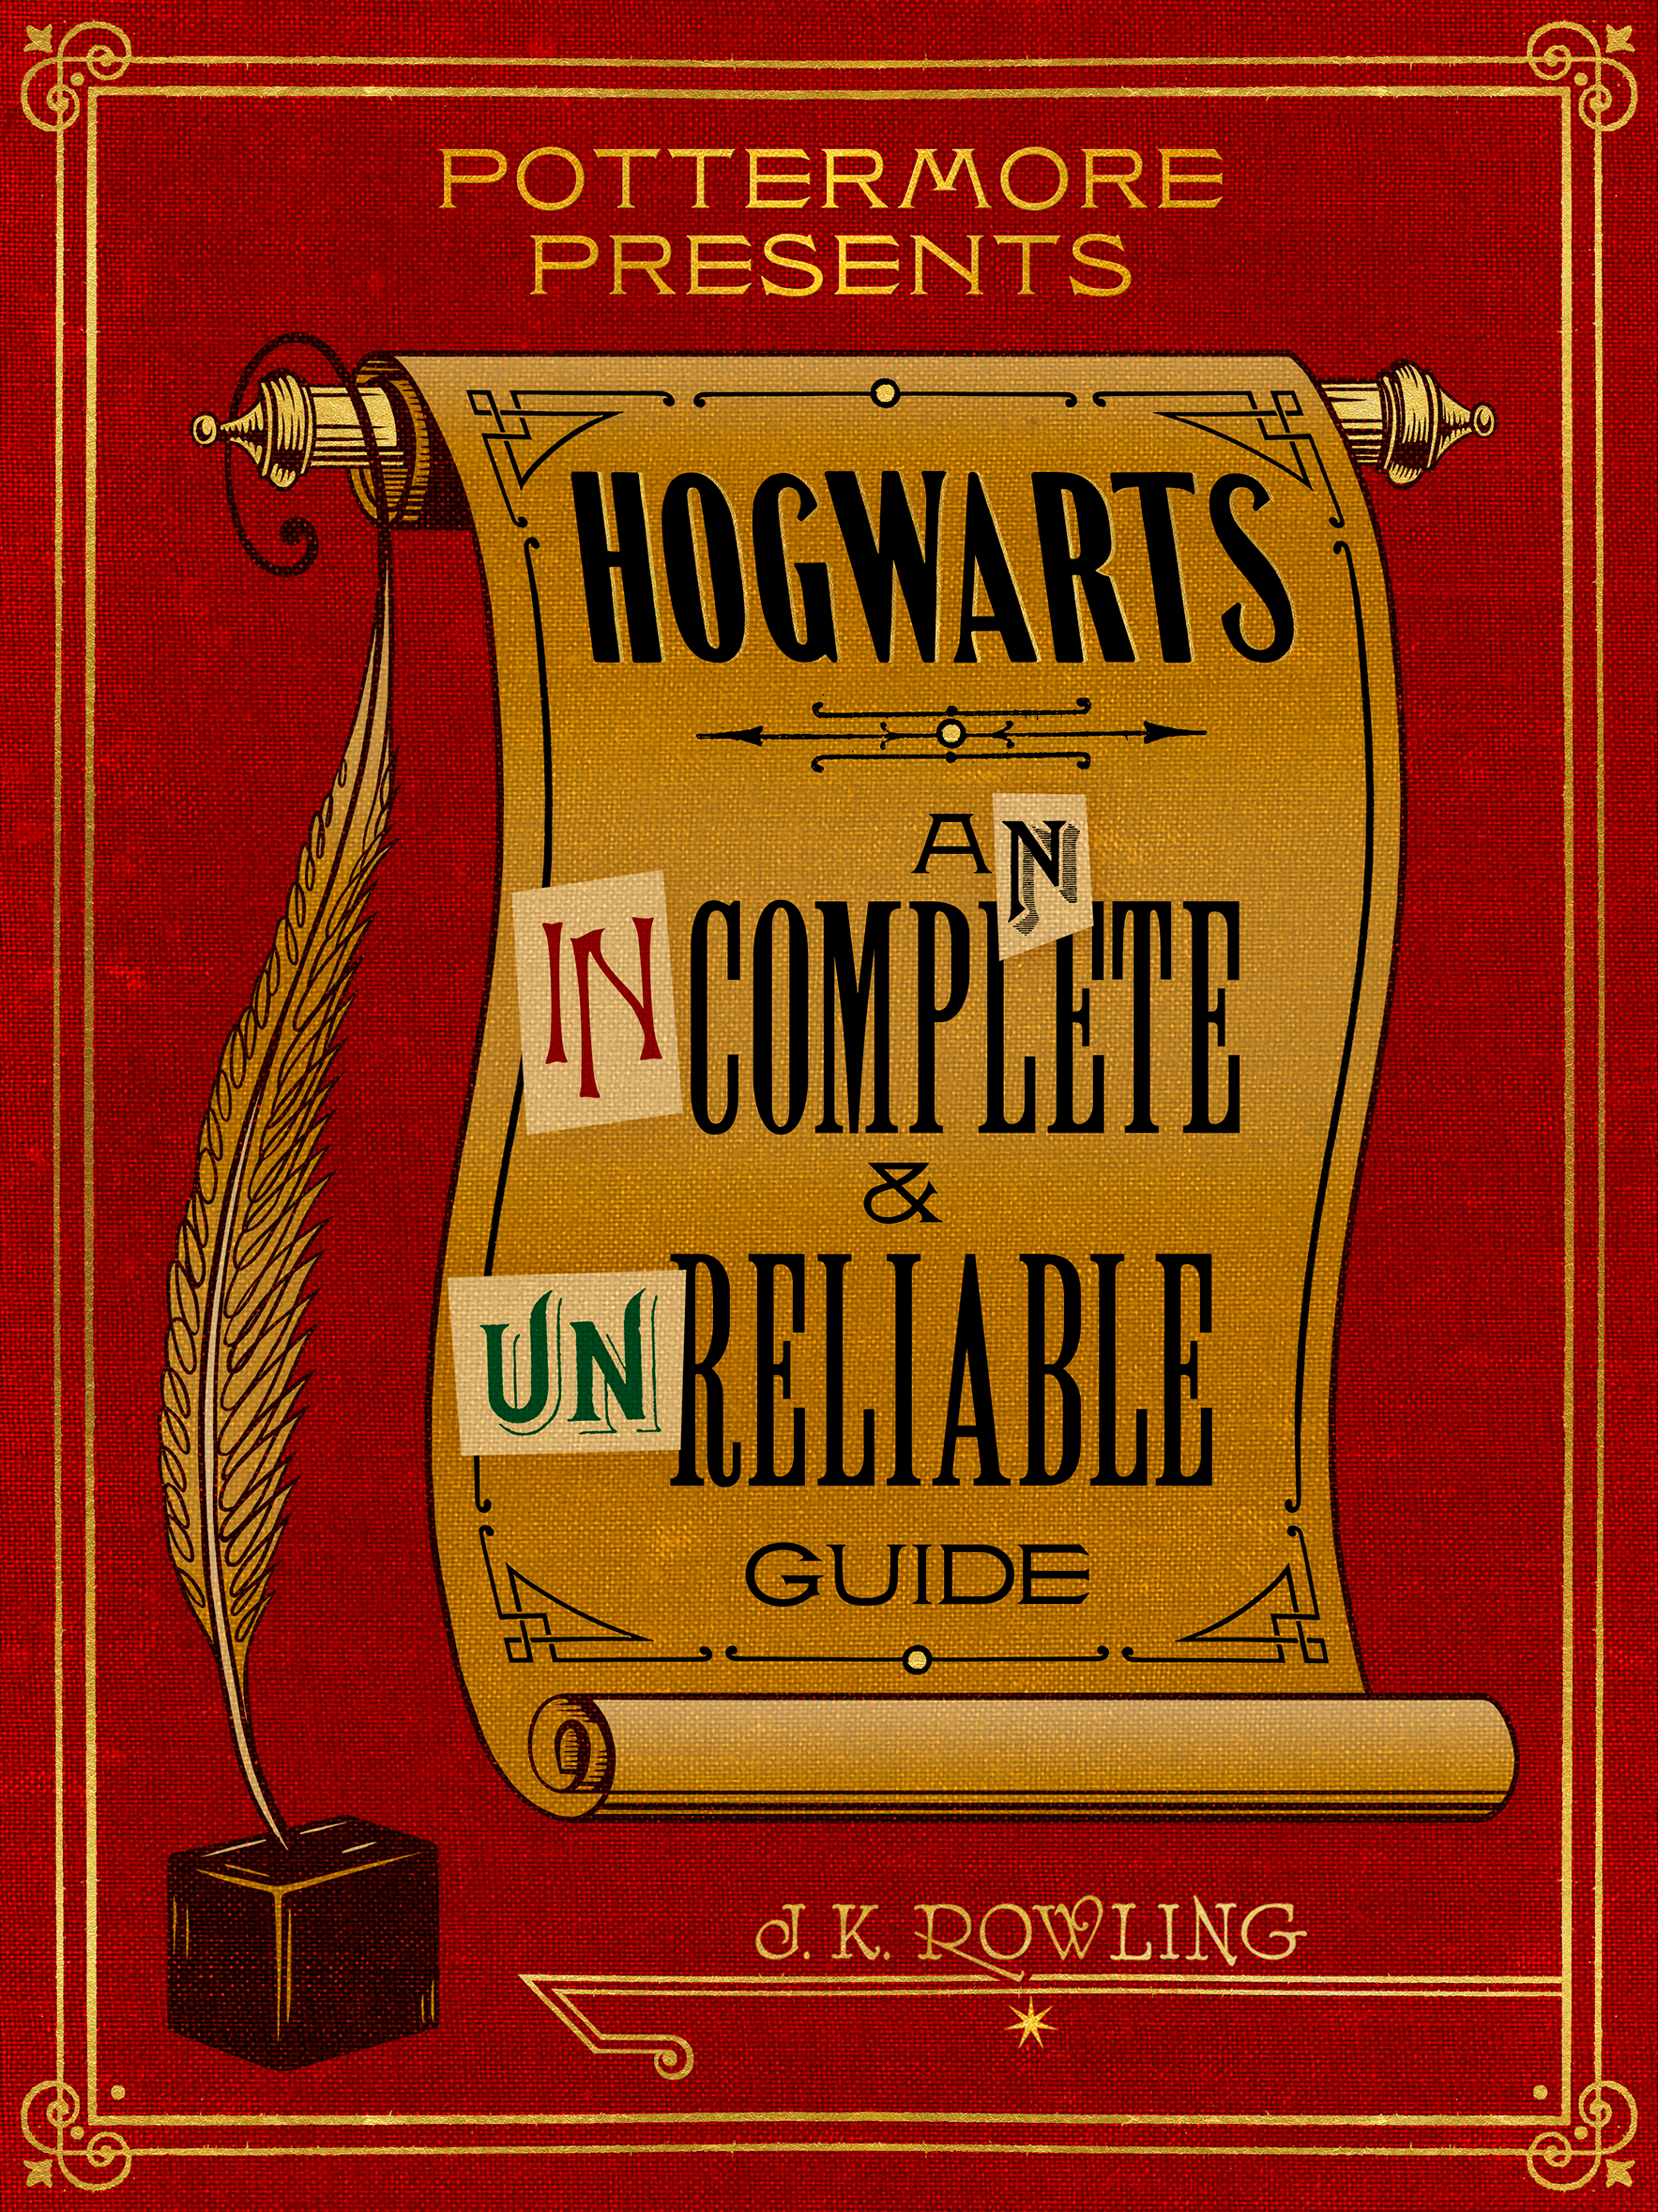 Hogwarts Legacy: The Official Game Guide, Harry Potter Wiki